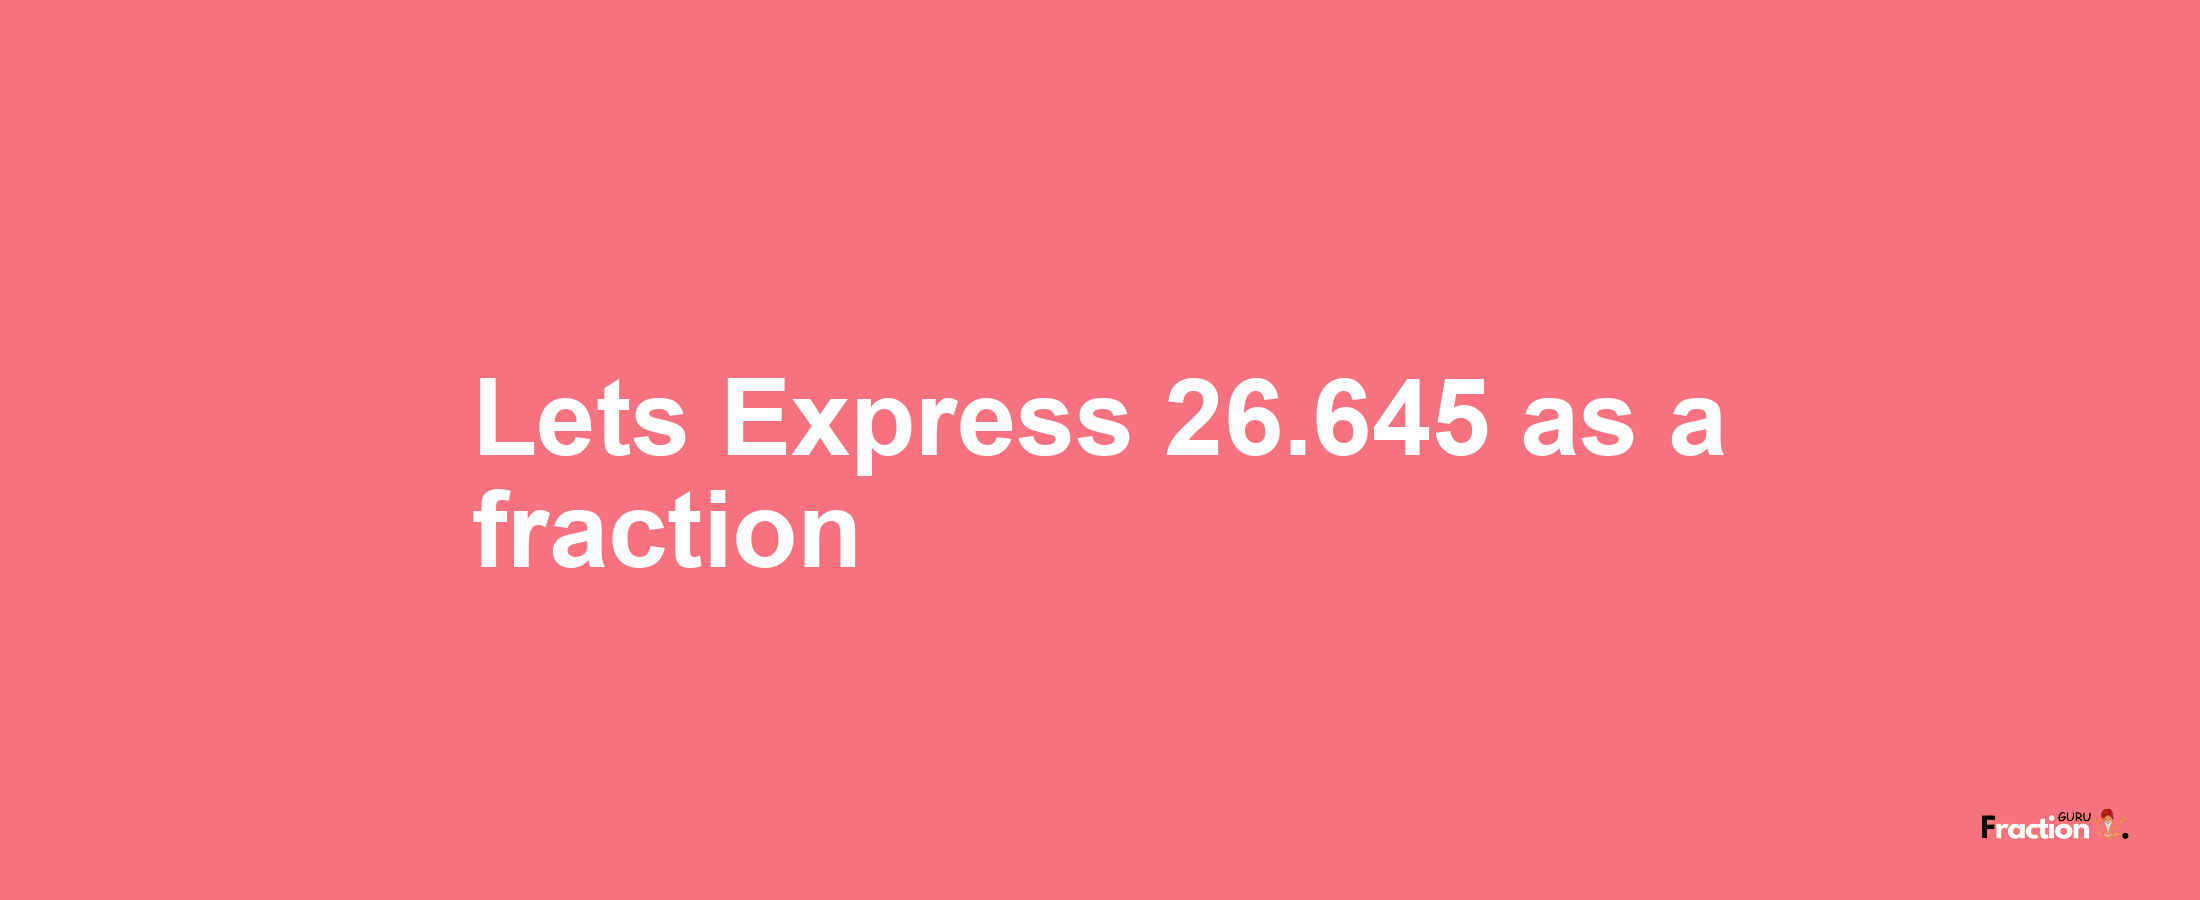 Lets Express 26.645 as afraction